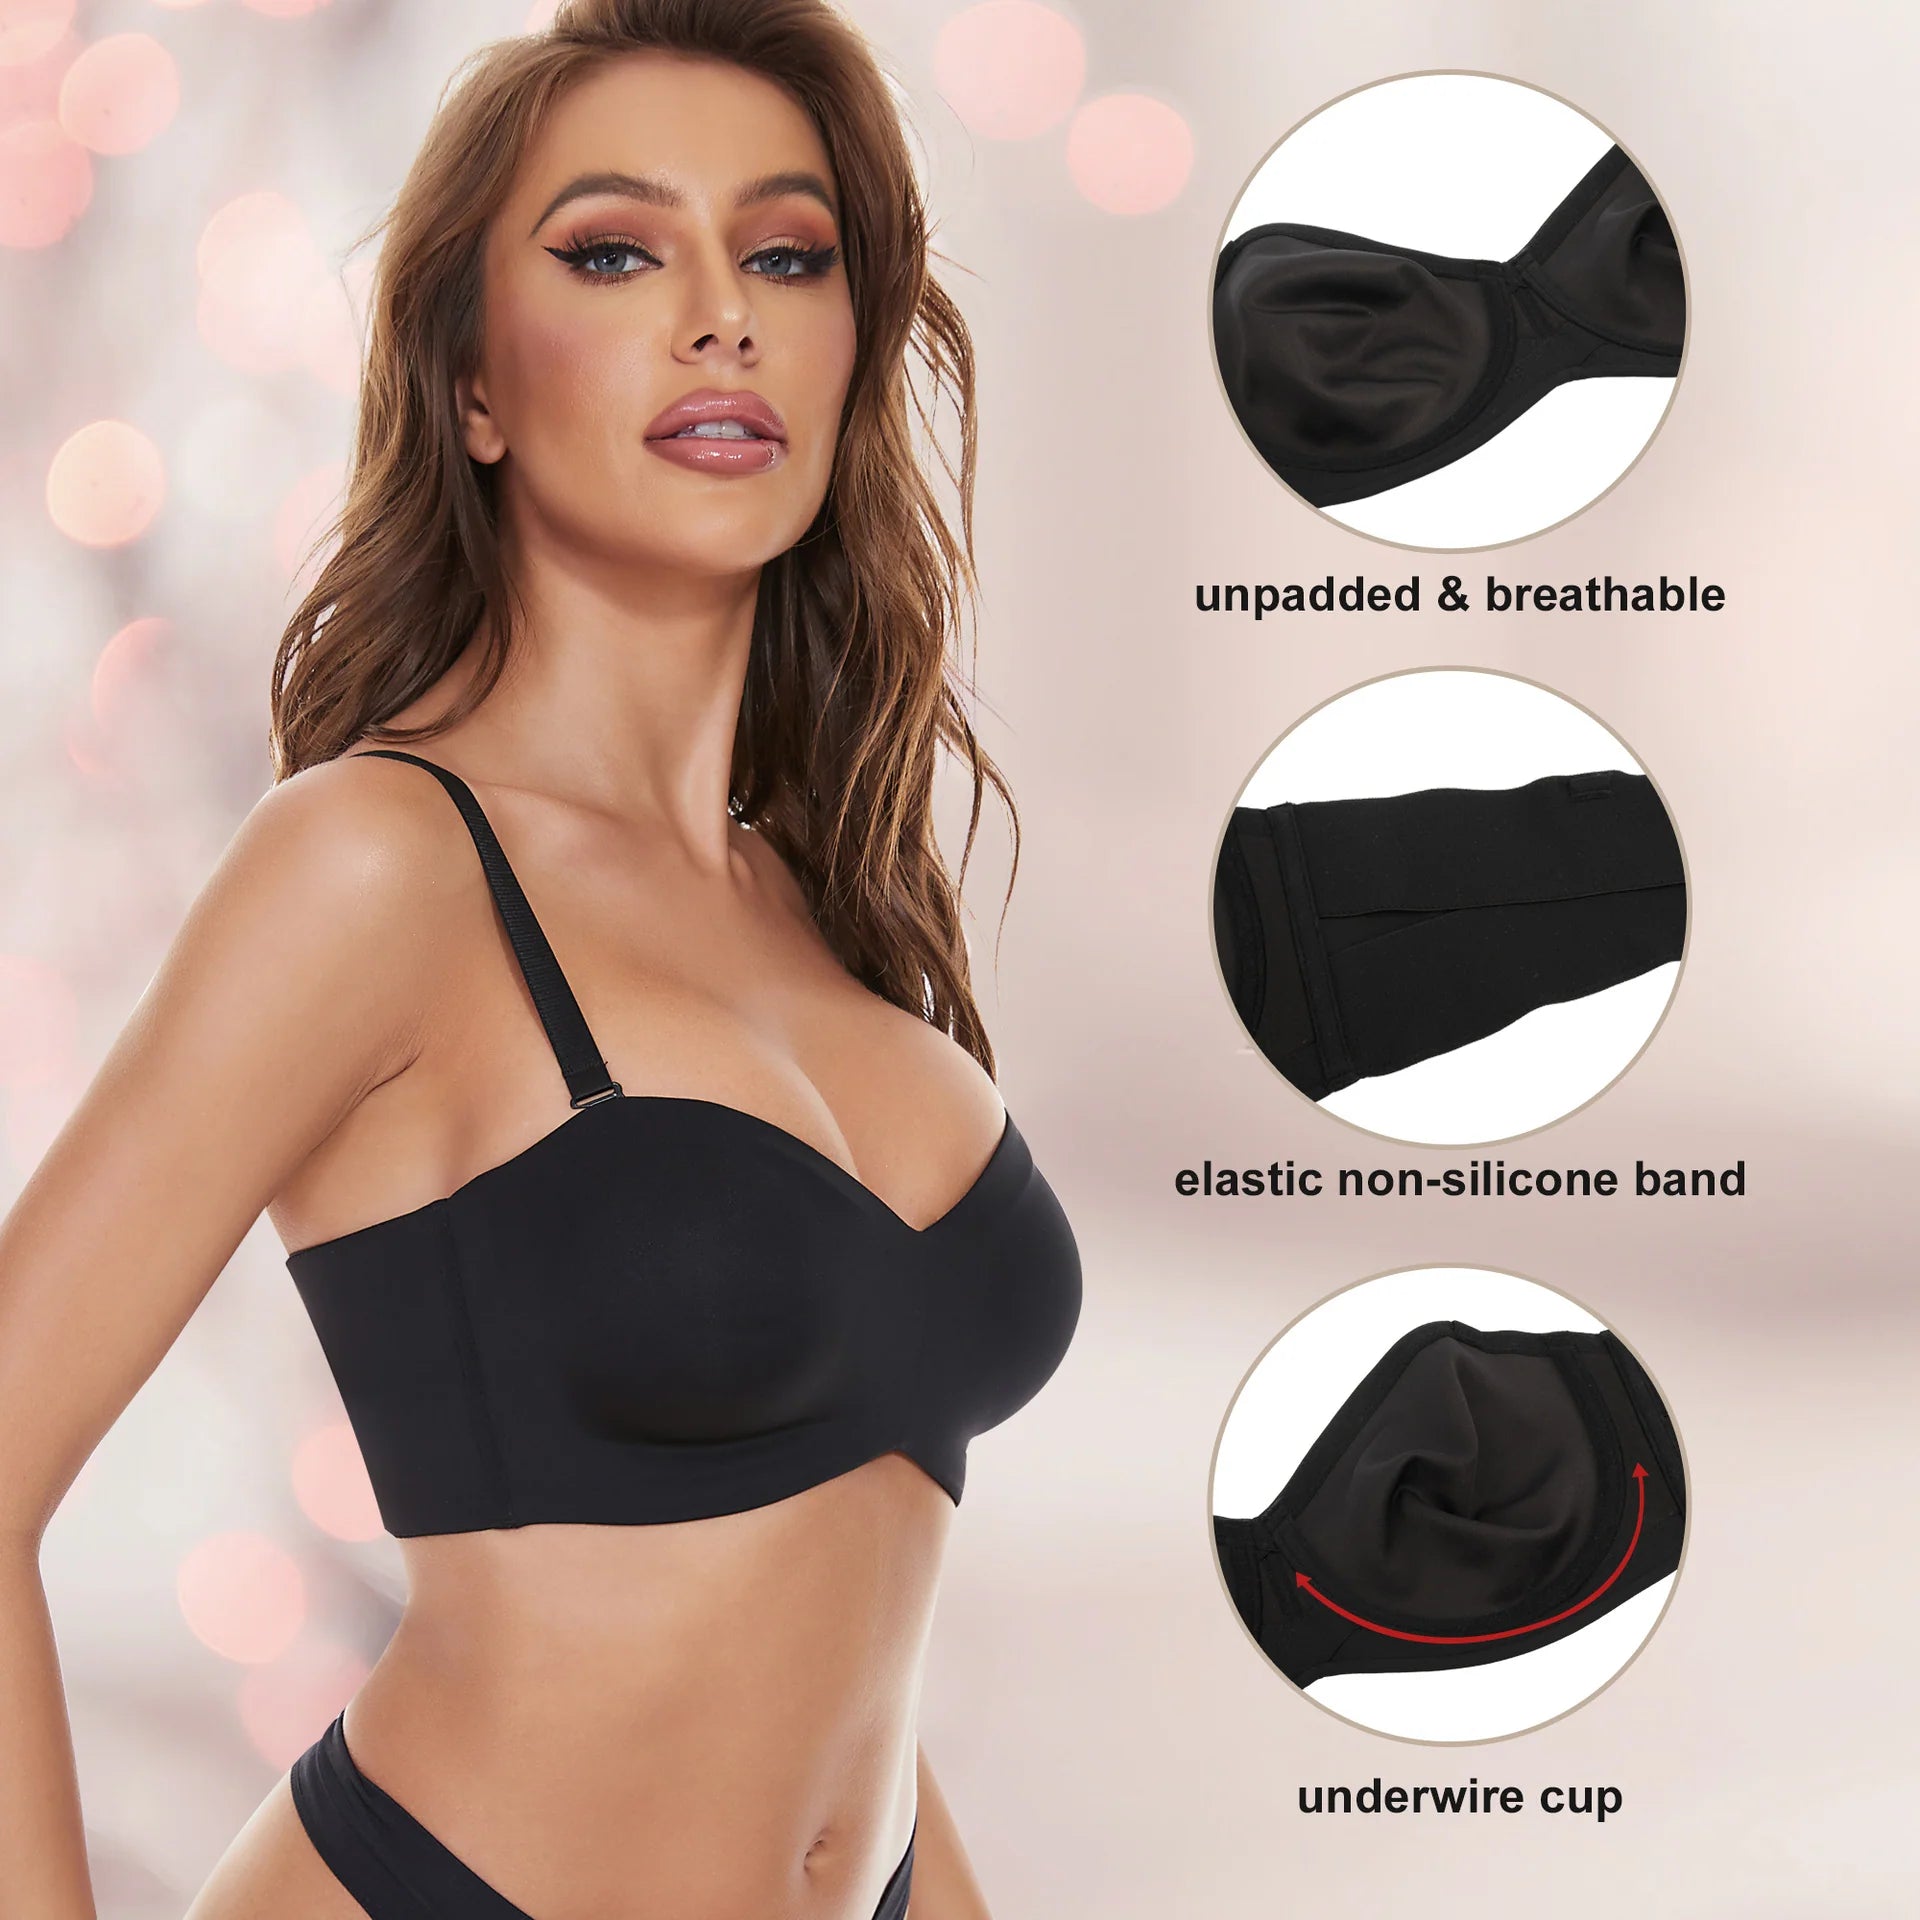 Eversocute Bra - Supportive Bandeau Bra - Not Sold In Stores